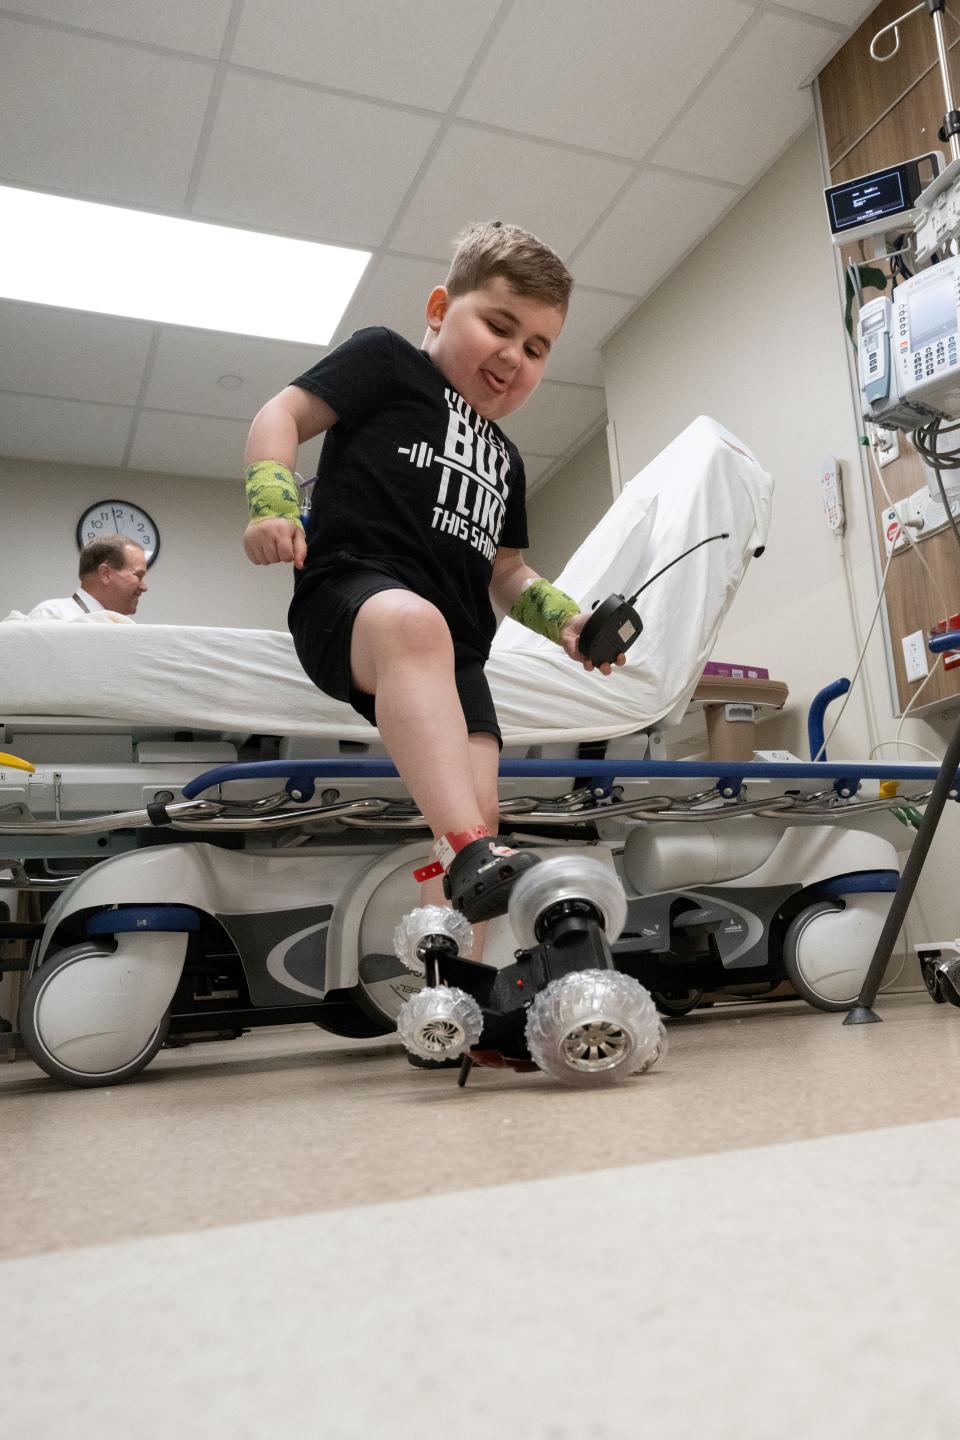 Six-year-old Vinny DeMando plays while waiting for his treatment at Akron Children's Hospital.